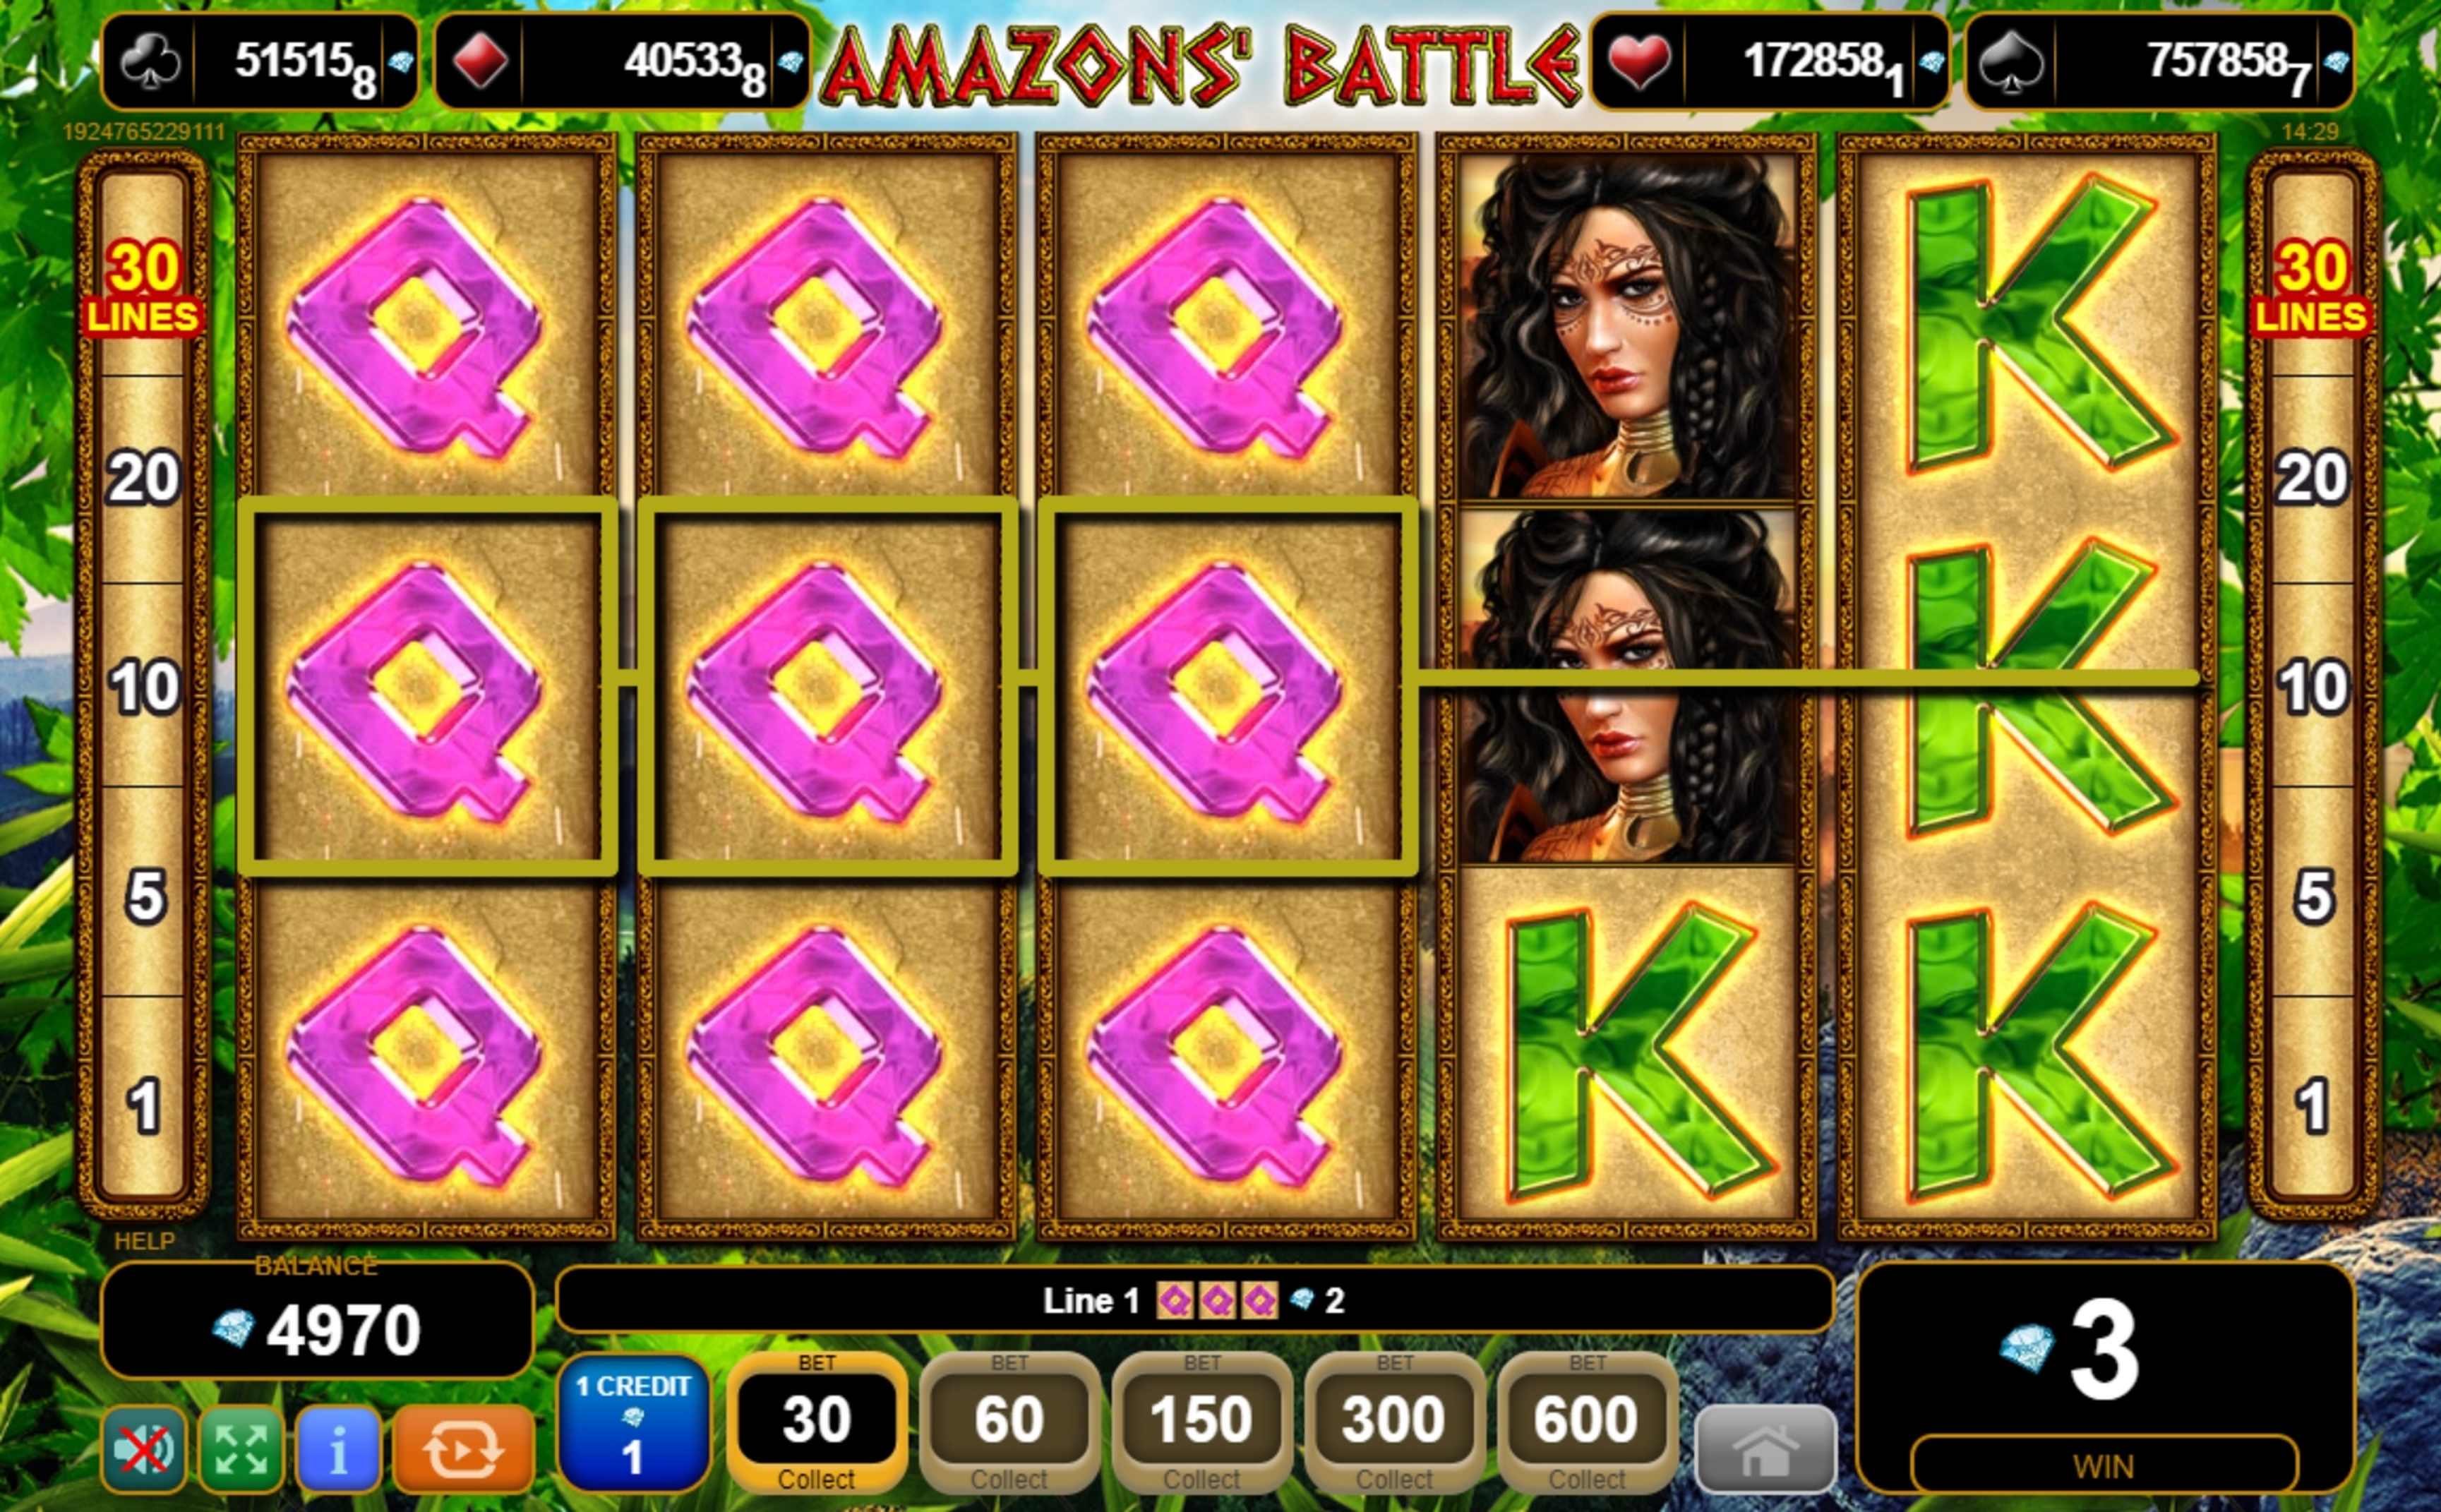 Win Money in Amazons' Battle Free Slot Game by EGT